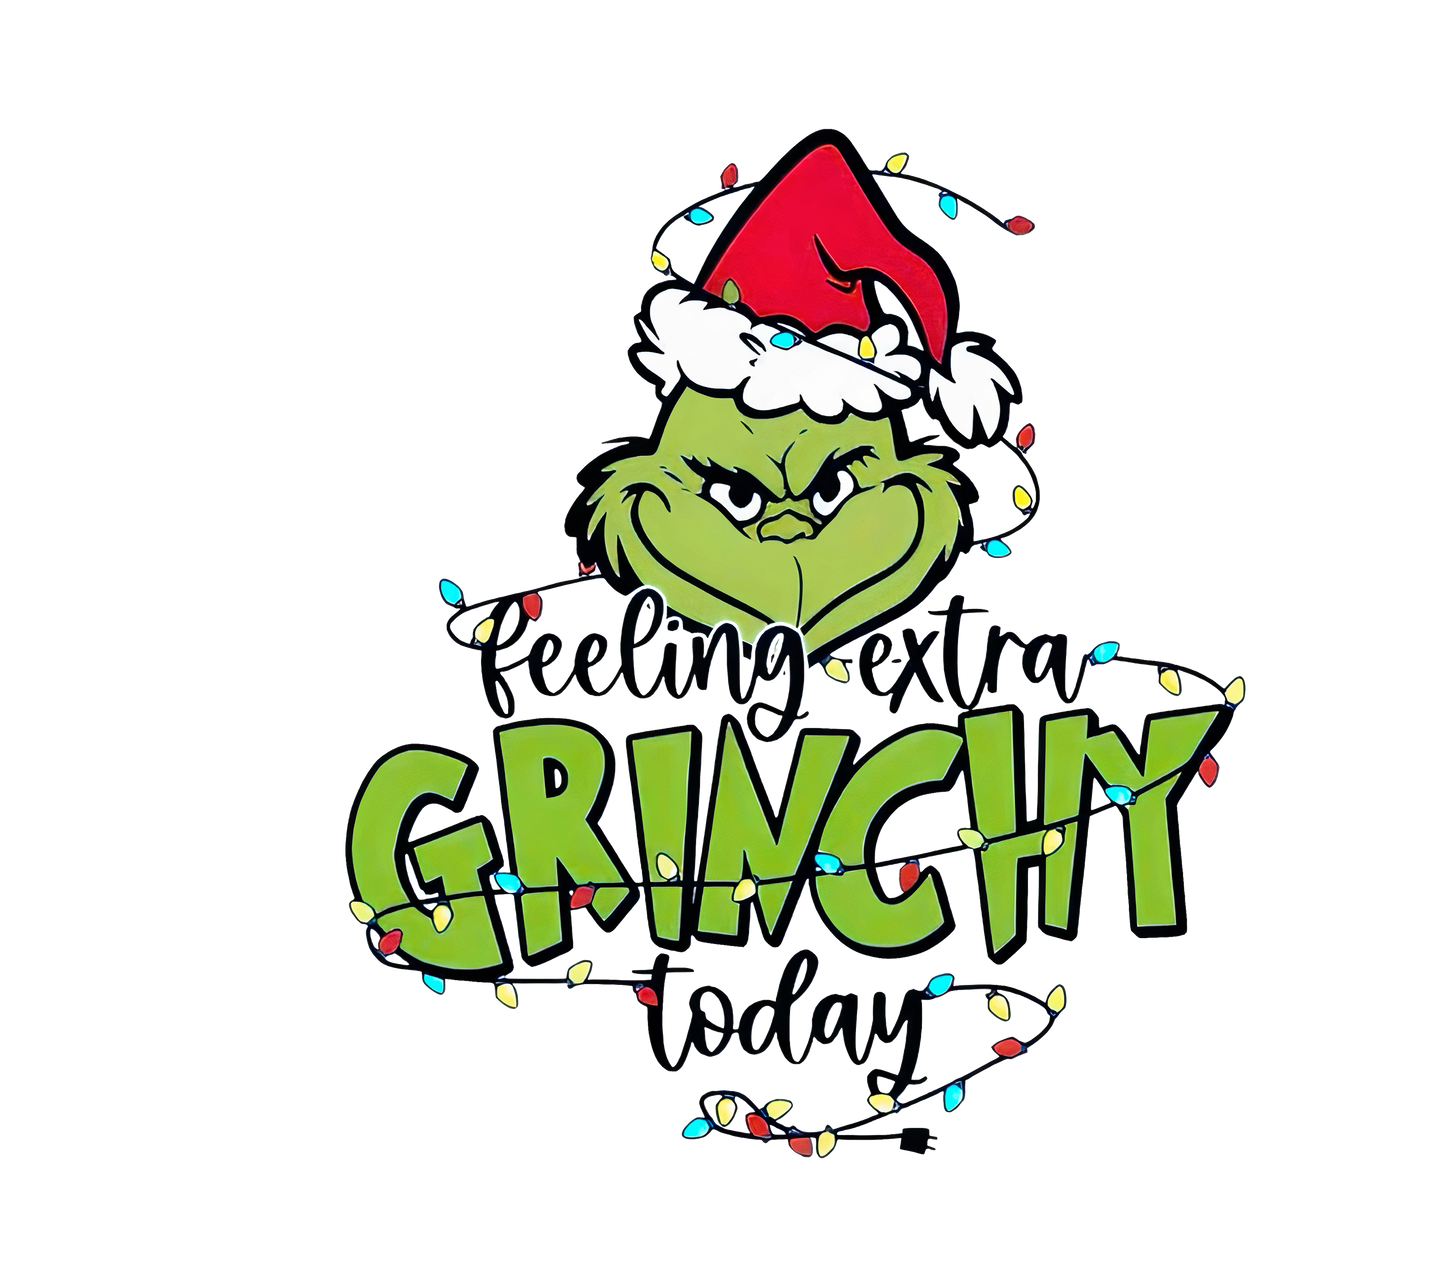 FEELING EXTRA GRINCHY TODAY